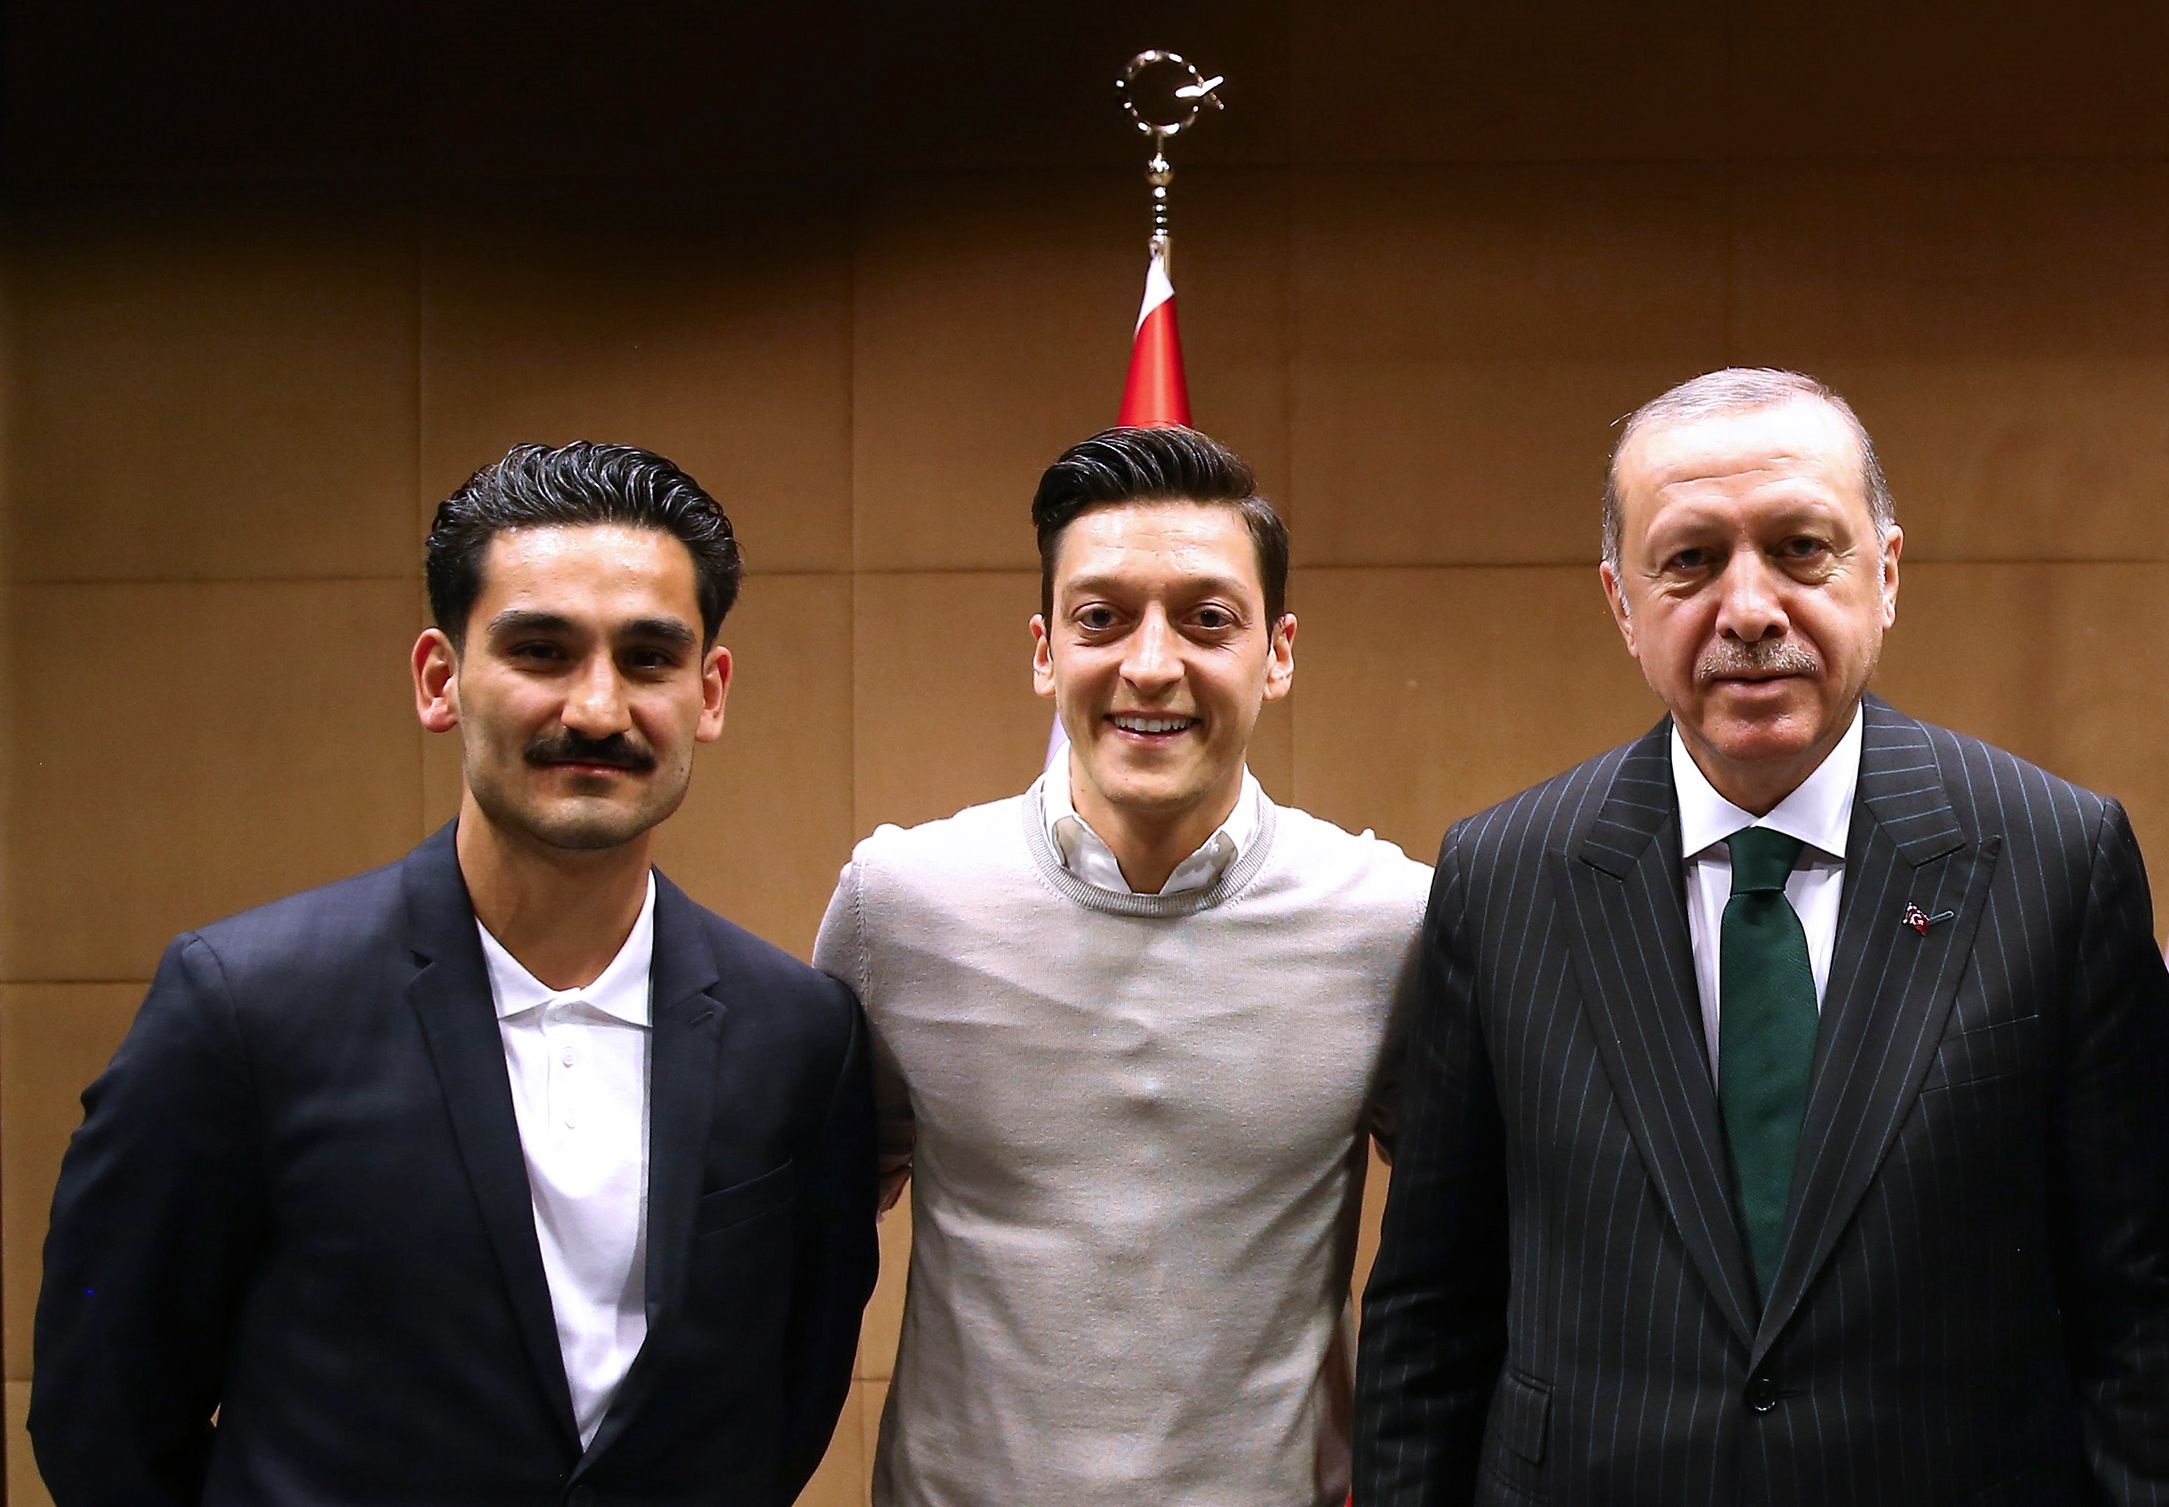 In this handout picture taken on May 13, 2018 and released on May 14, 2018 by the Turkish Presidential Press office Turkish President Recep Tayyip Erdogan (R) poses for a photo with German footballers of Turkish origin Ilkay Gundogan (L) and Mesut Ozil (2nd L) in London. Since Germany humiliatingly crashed out of the World Cup, Mesut Ozil, 29, quickly become a scapegoat for far-right populists, but the storm escalated when even German football bosses, rather than defend him, suggested the squad may have been better off without him. - RESTRICTED TO EDITORIAL USE - MANDATORY CREDIT "AFP PHOTO / TURKISH PRESIDENTIAL PRESS OFFICE / KAYHAN OZER" - NO MARKETING NO ADVERTISING CAMPAIGNS - DISTRIBUTED AS A SERVICE TO CLIENTS - ALTERNATIVE CROP / AFP / TURKISH PRESIDENTIAL PRESS SERVICE / KAYHAN OZER / RESTRICTED TO EDITORIAL USE - MANDATORY CREDIT "AFP PHOTO / TURKISH PRESIDENTIAL PRESS OFFICE / KAYHAN OZER" - NO MARKETING NO ADVERTISING CAMPAIGNS - DISTRIBUTED AS A SERVICE TO CLIENTS - ALTERNATIVE CROP